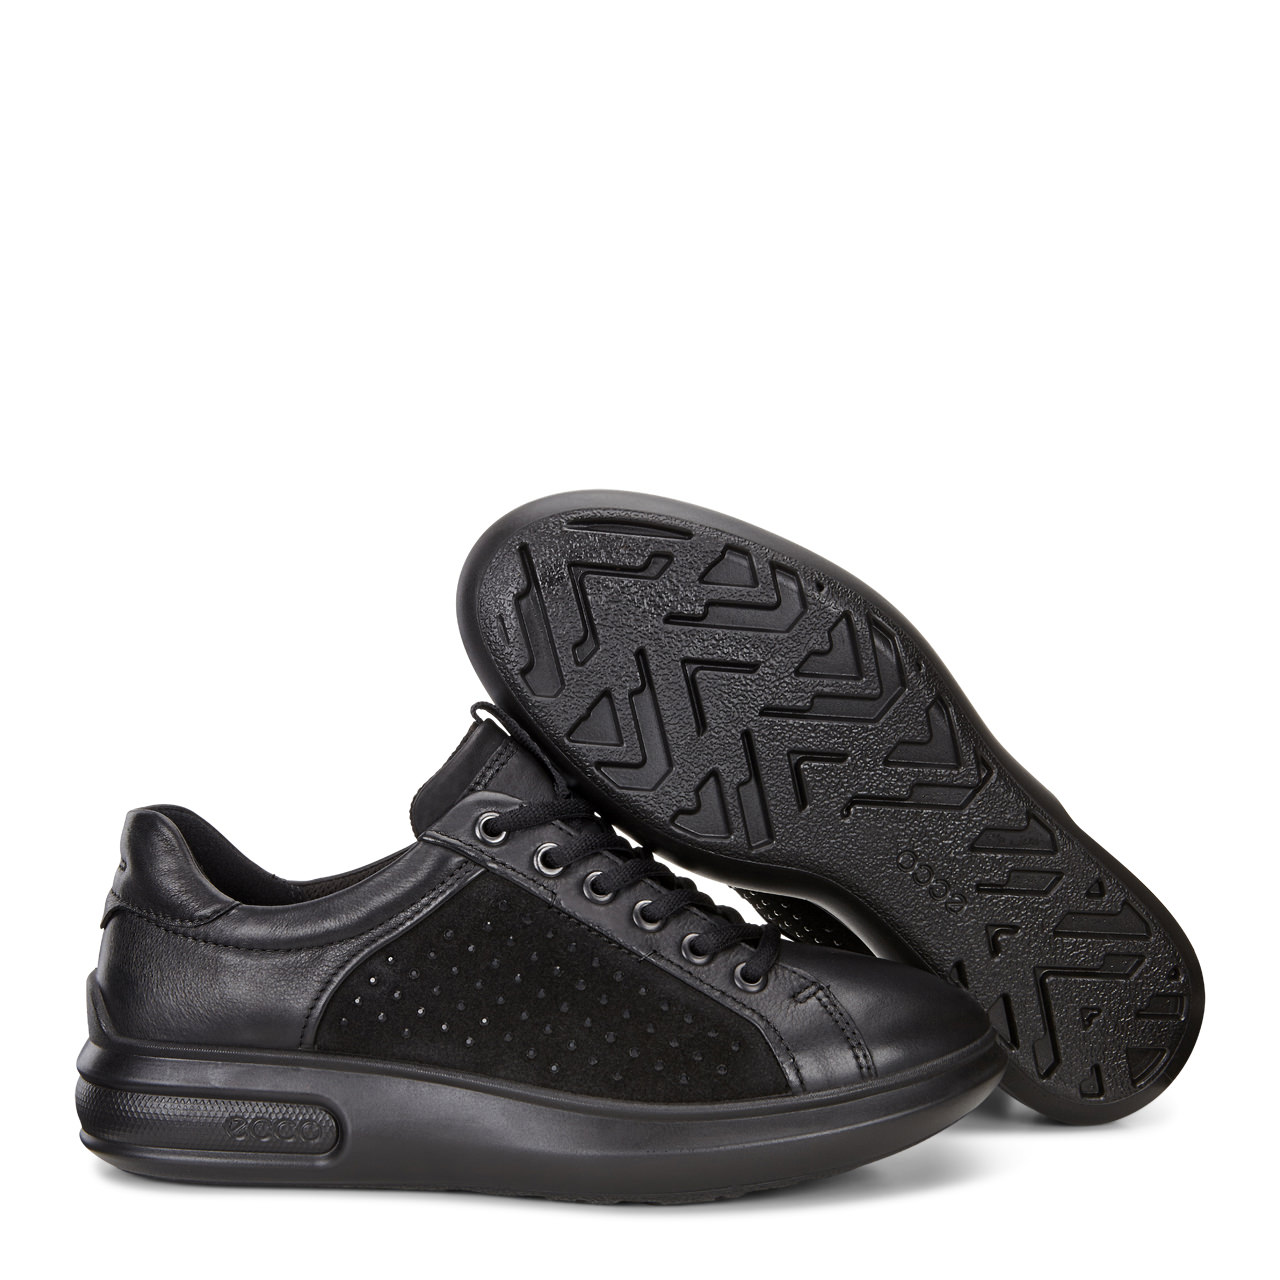 Clearance - SOFT 3 - ECCO Shoes NZ